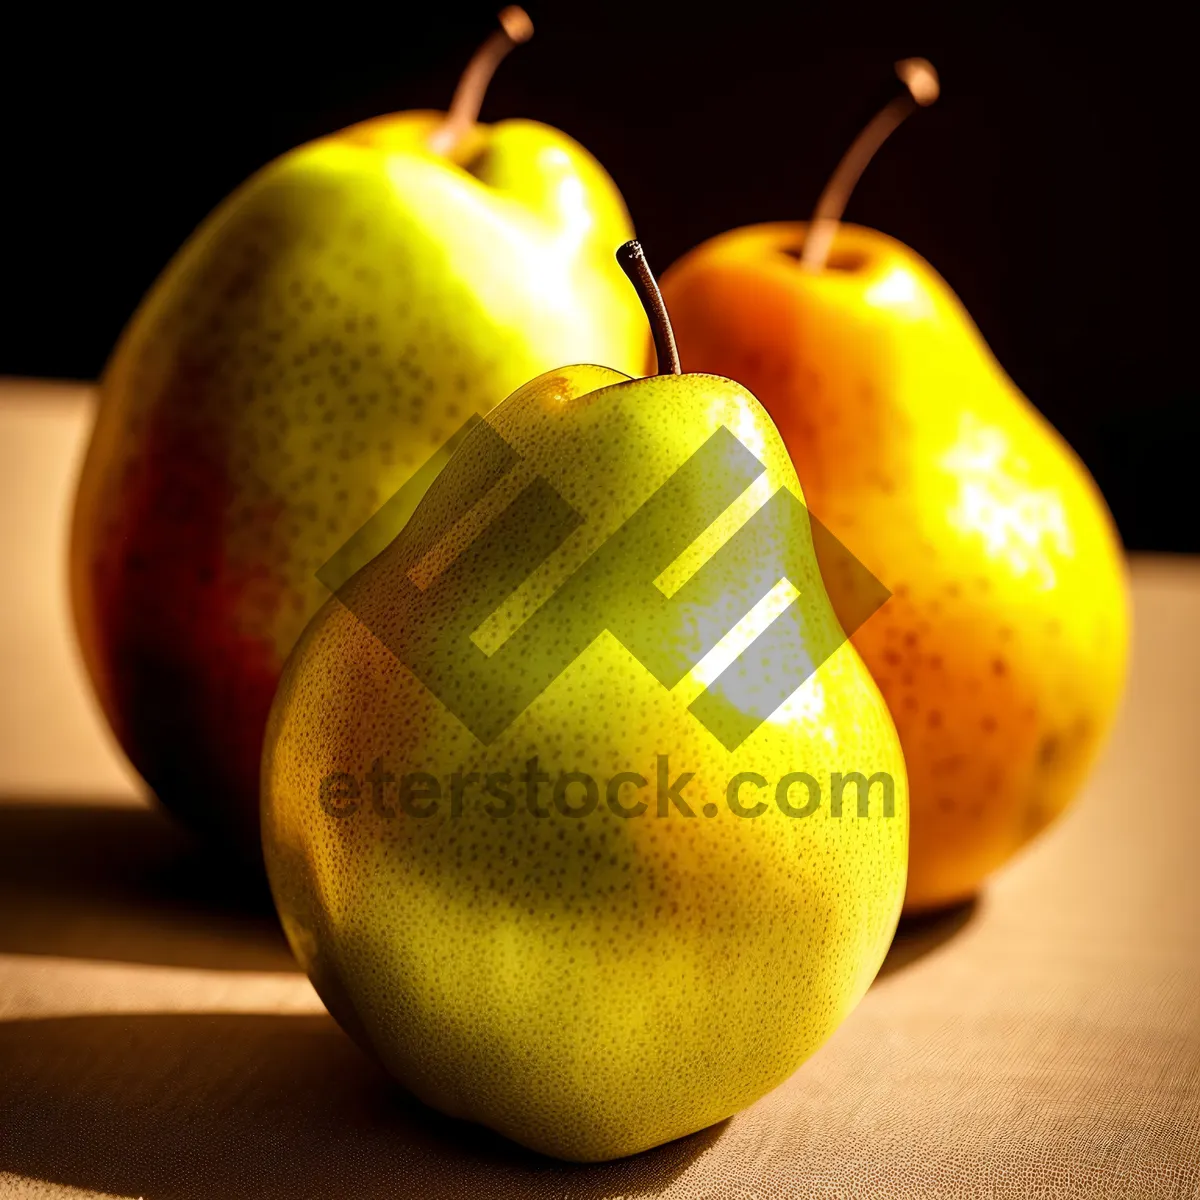 Picture of Ripe, Juicy Pear - A Sweet Citrus Delight